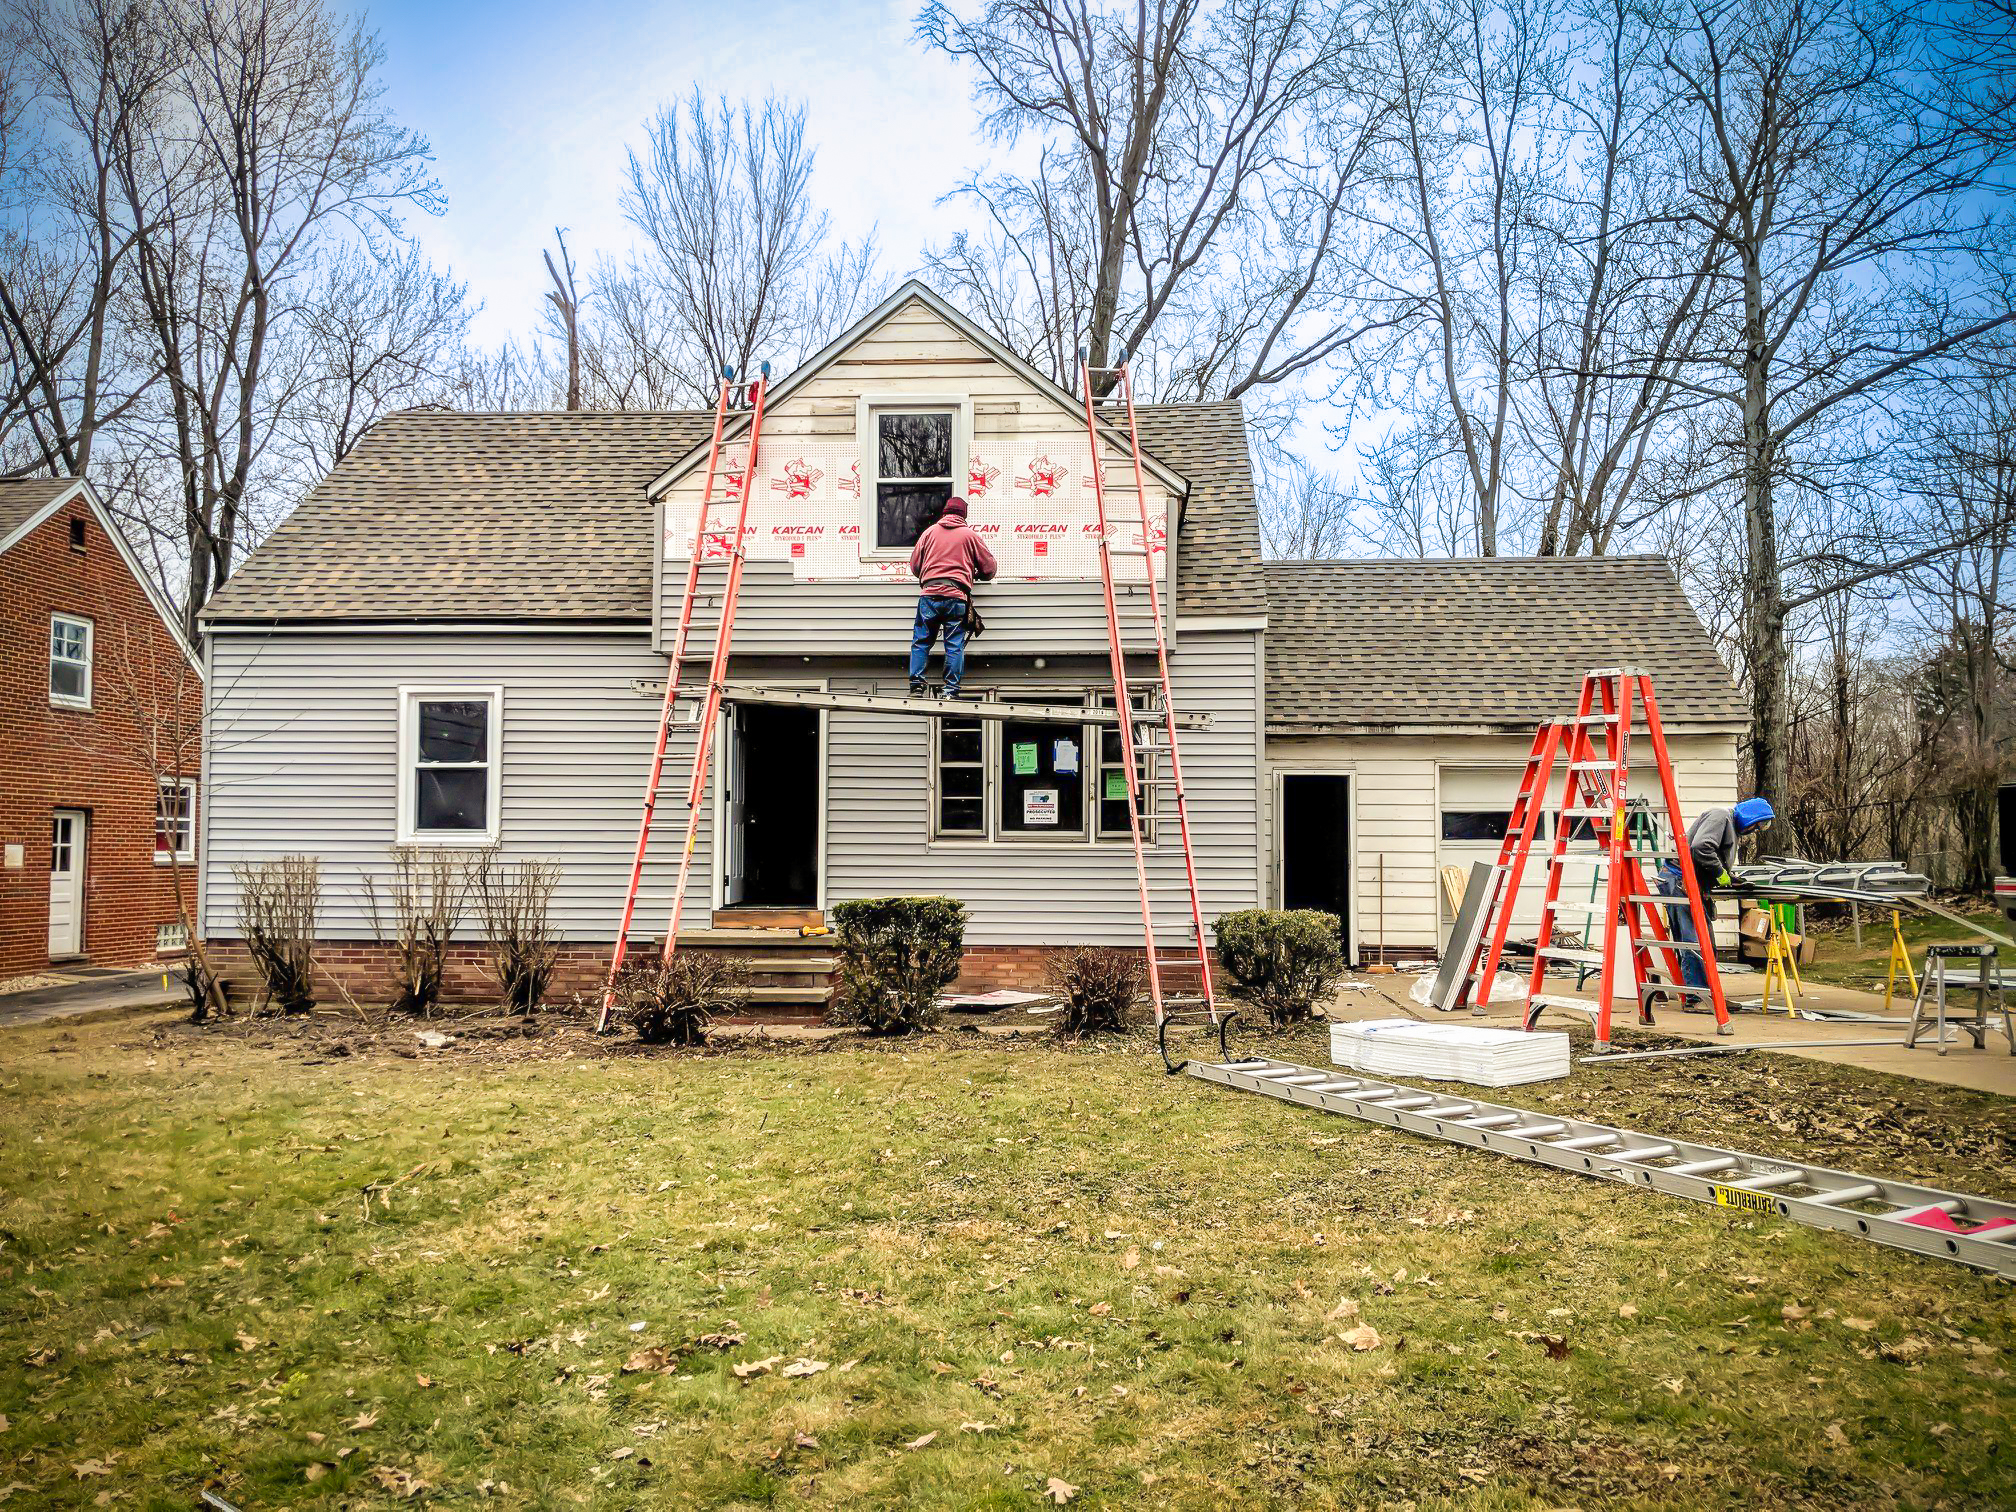 Landscape photograph of exterior single family house under renovation by skilled laborers.